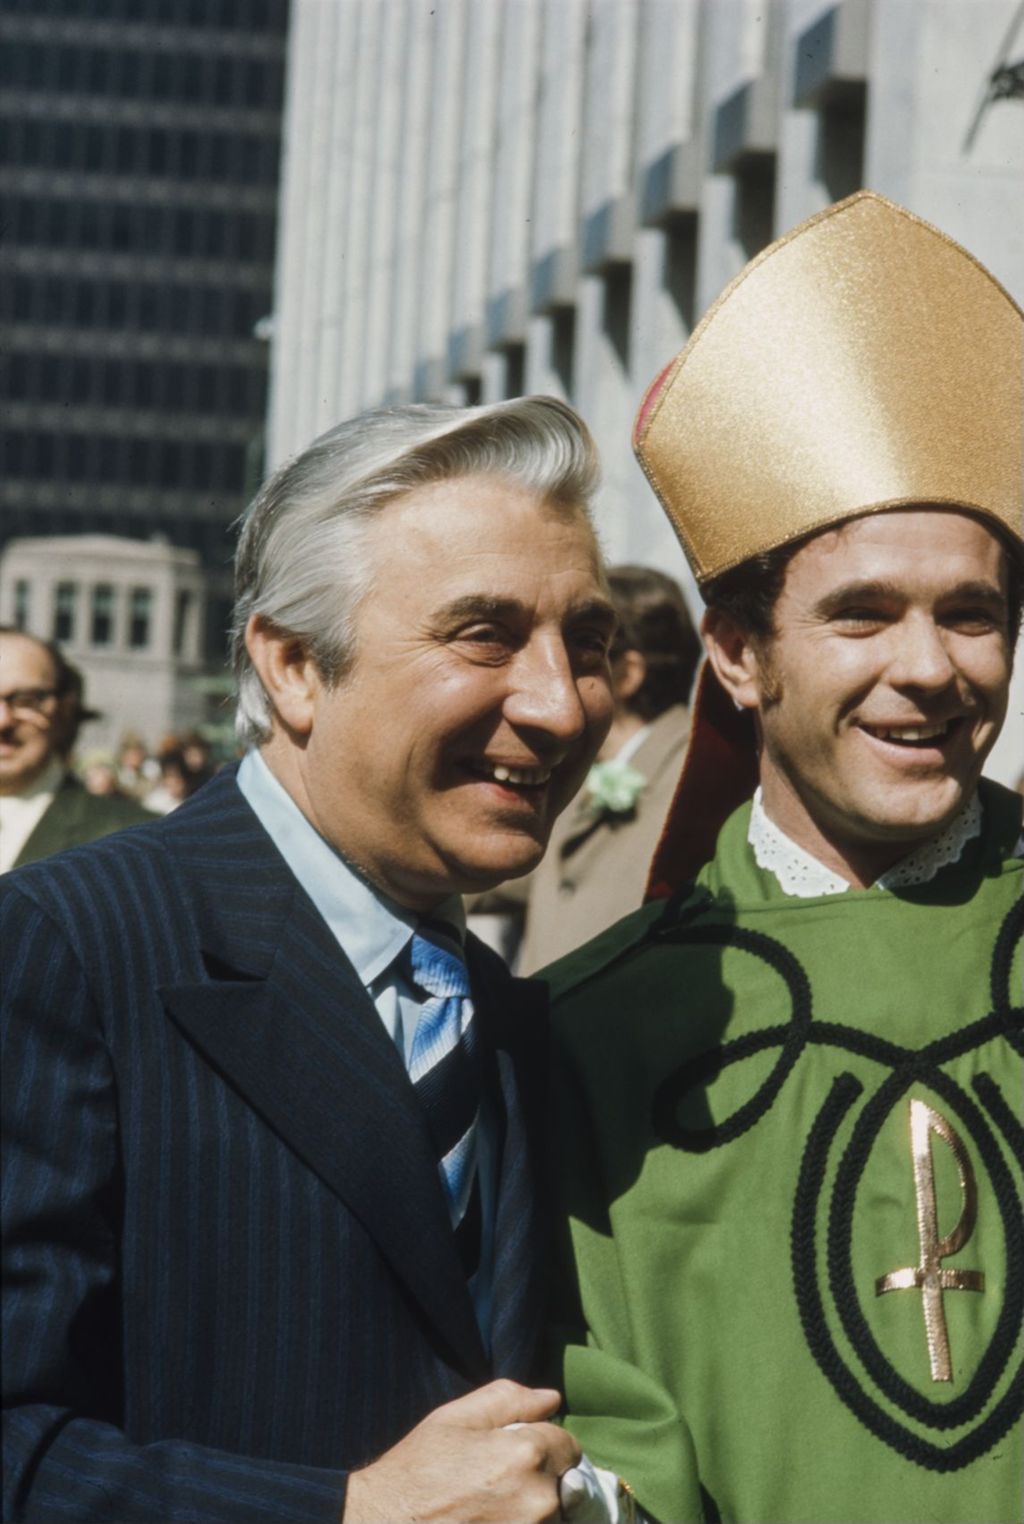 Miniature of St. Patrick's Day Parade, Roman Pucinski with man dressed as St. Patrick